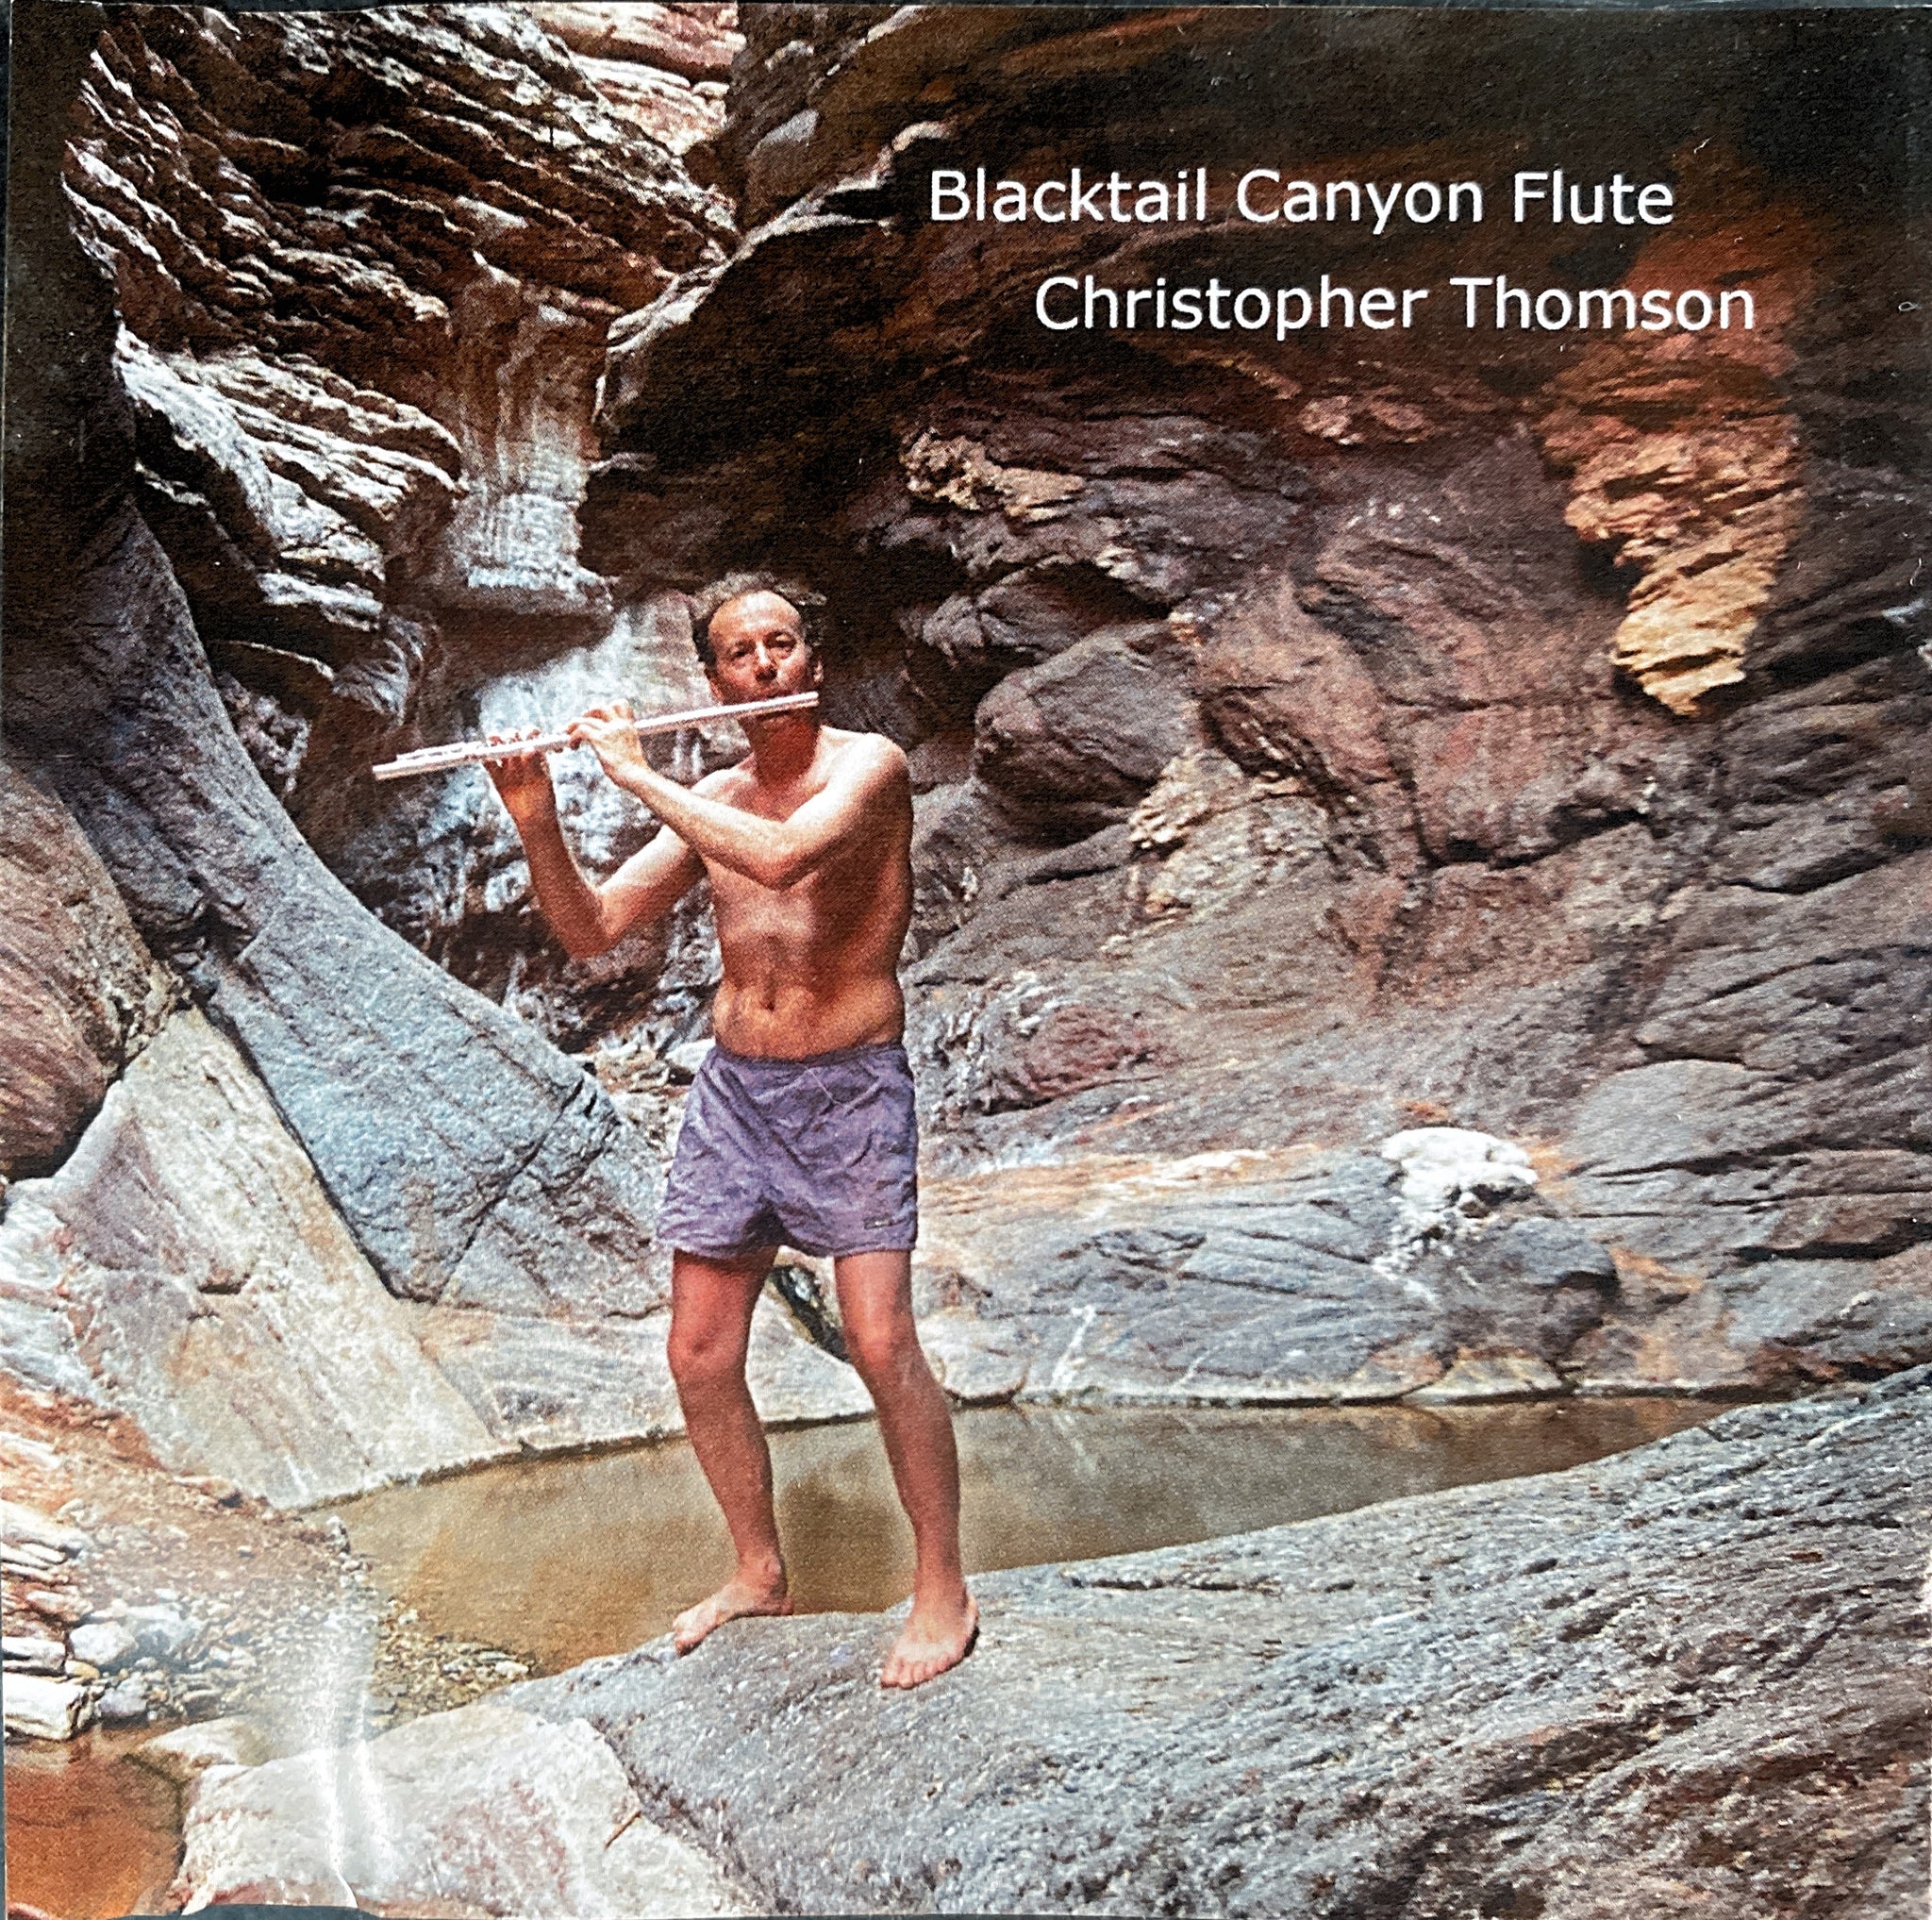 Album cover with a man wearing swimming trunks playing flute in a cave. Reads "Blacktail Canyon Flute" and "Christopher Thomson".